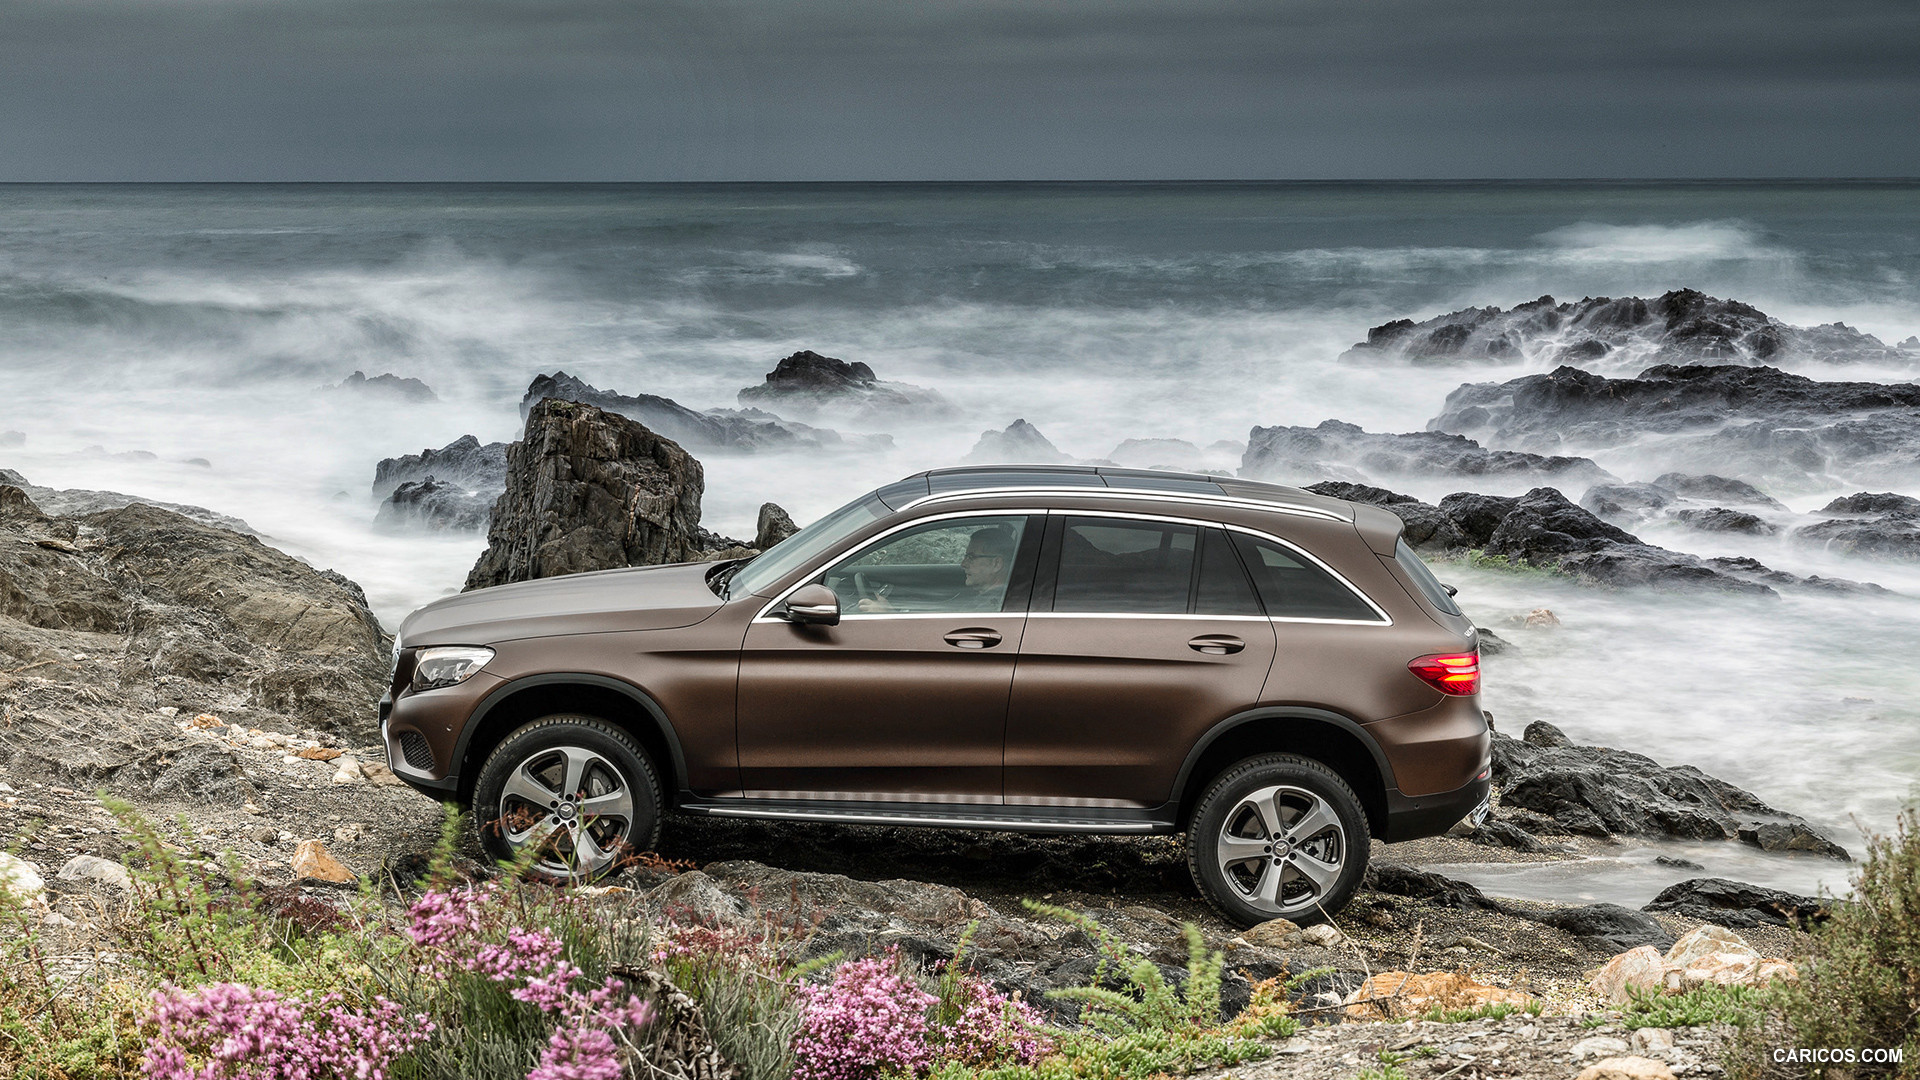 2016 Mercedes-Benz GLC-Class GLC 250d 4MATIC (Citrine Brown Magno, Offroad Line) - Side, #21 of 254